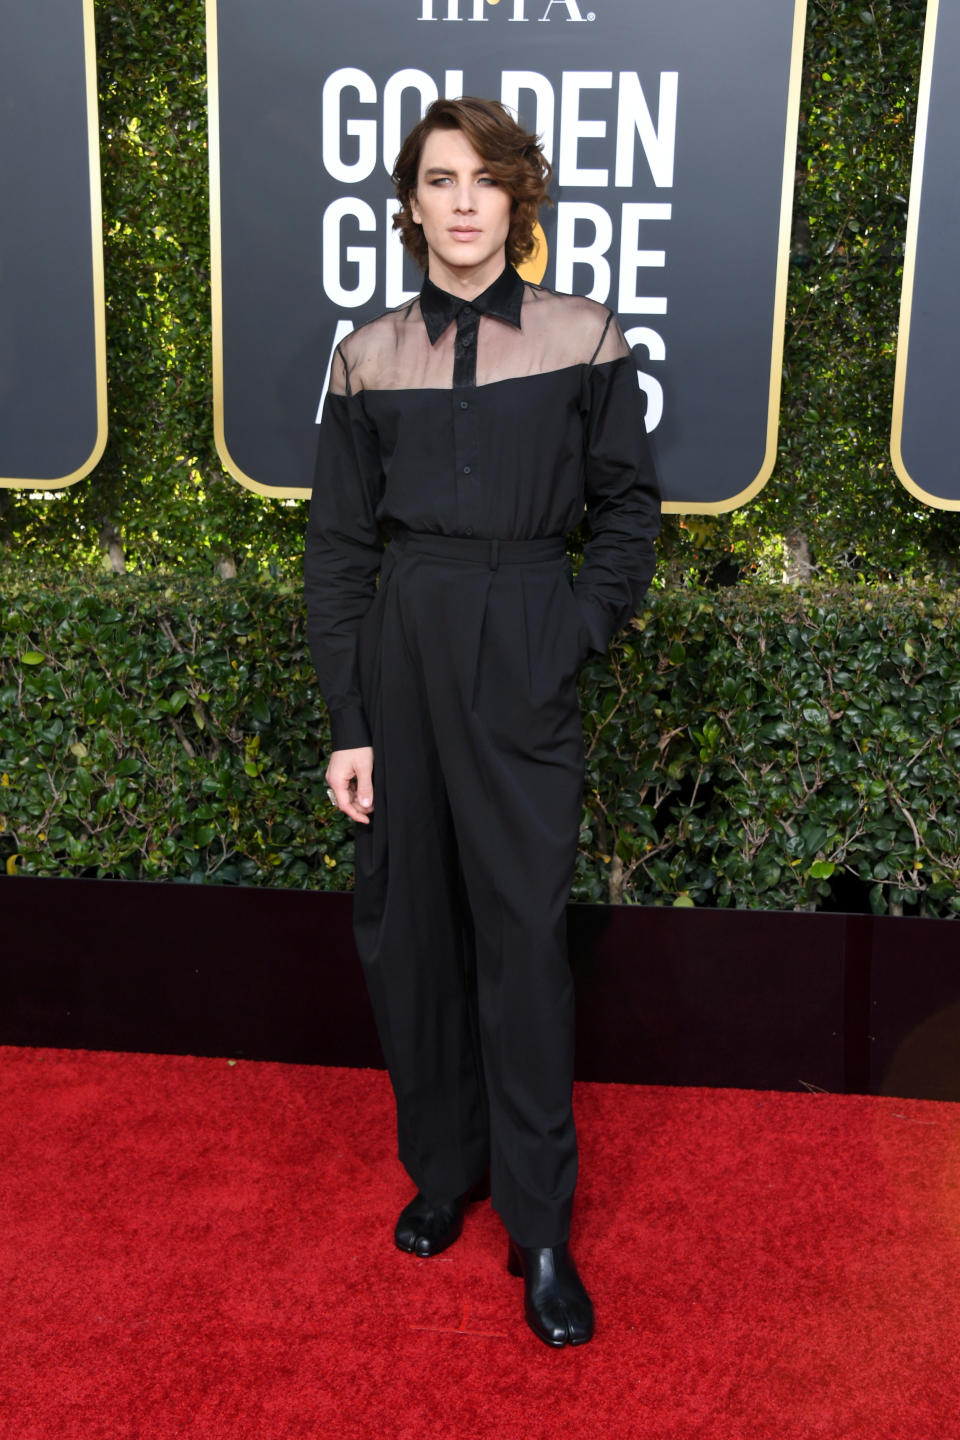 cody fern, golden globes, red carpet, tabby shoes, black tabby shoes